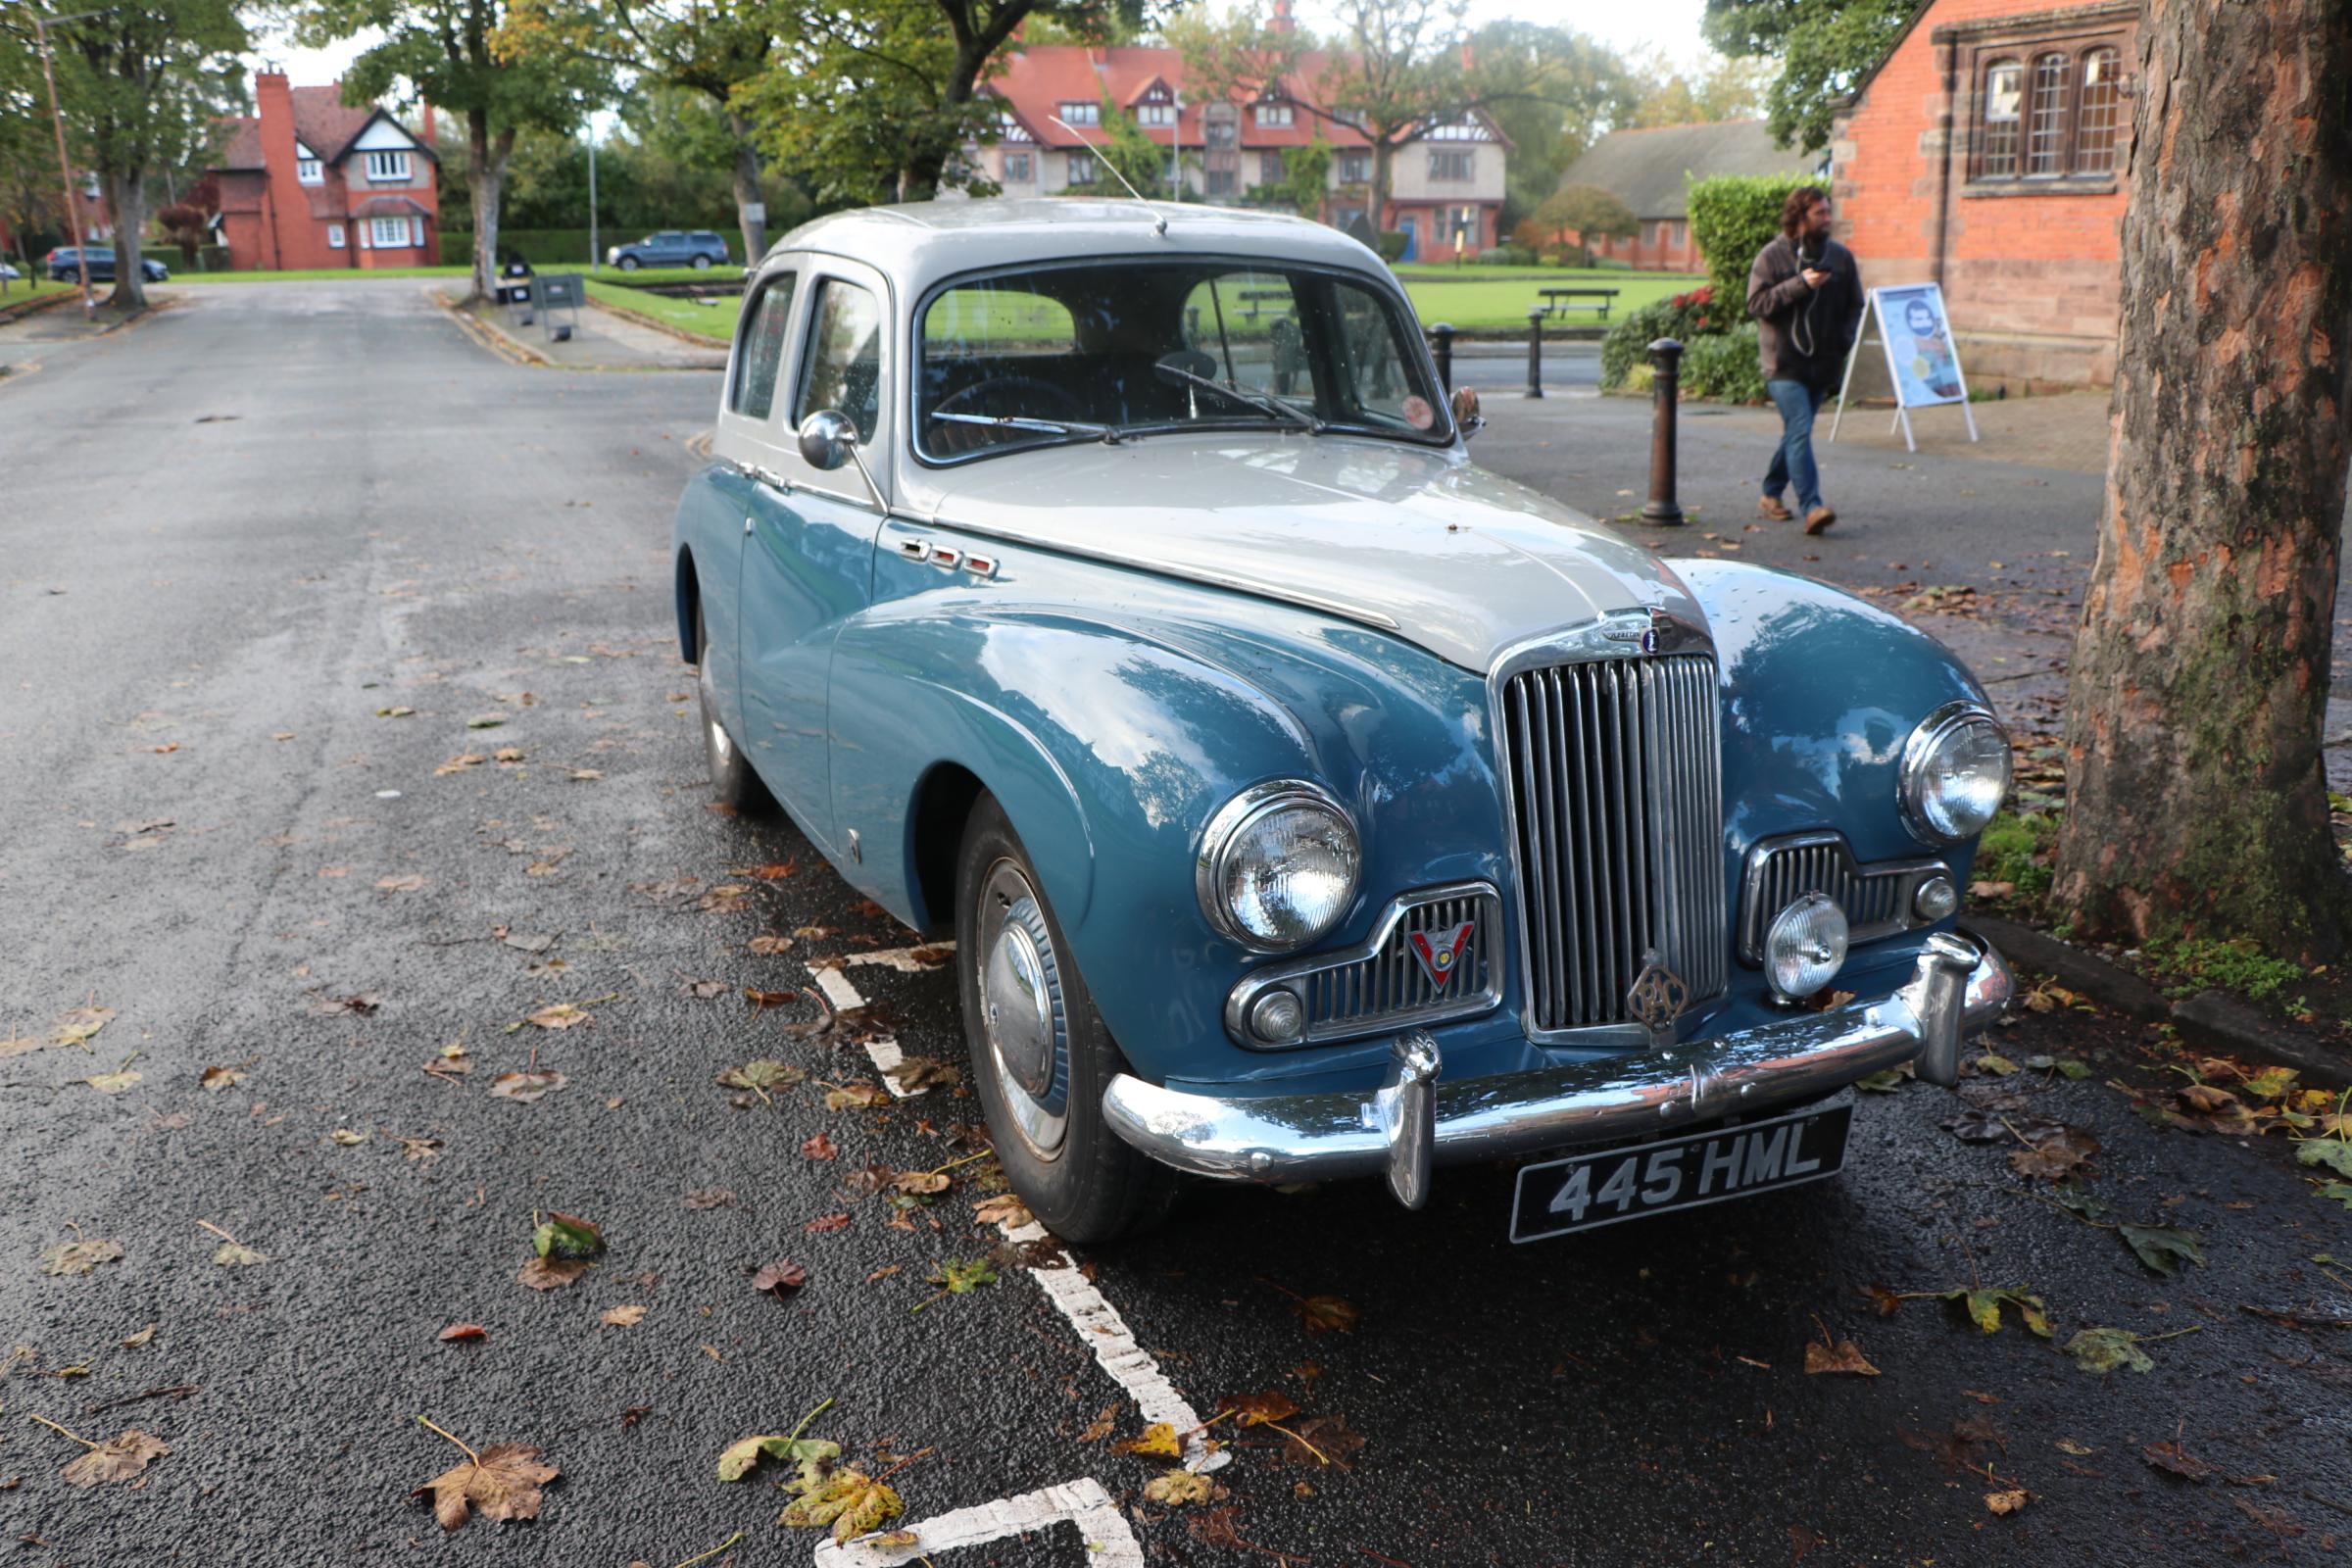 One of the classic cars currently positioned in Port Sunlight